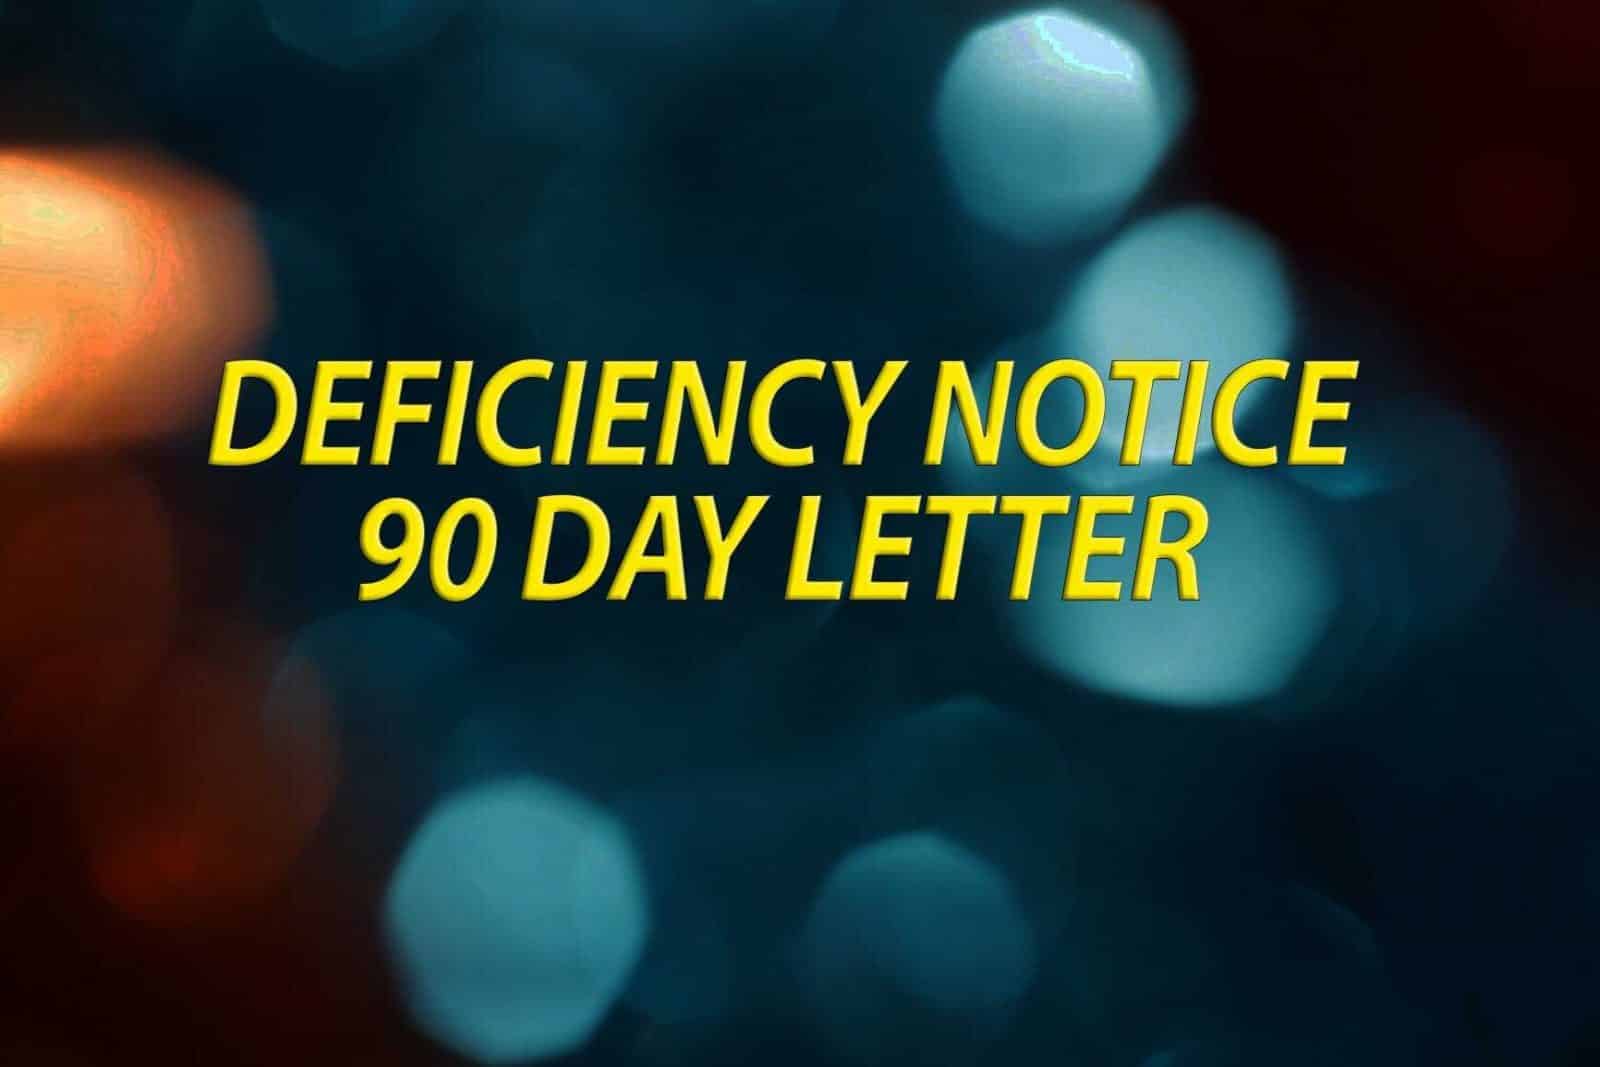 Deficiency notce 90 day letter